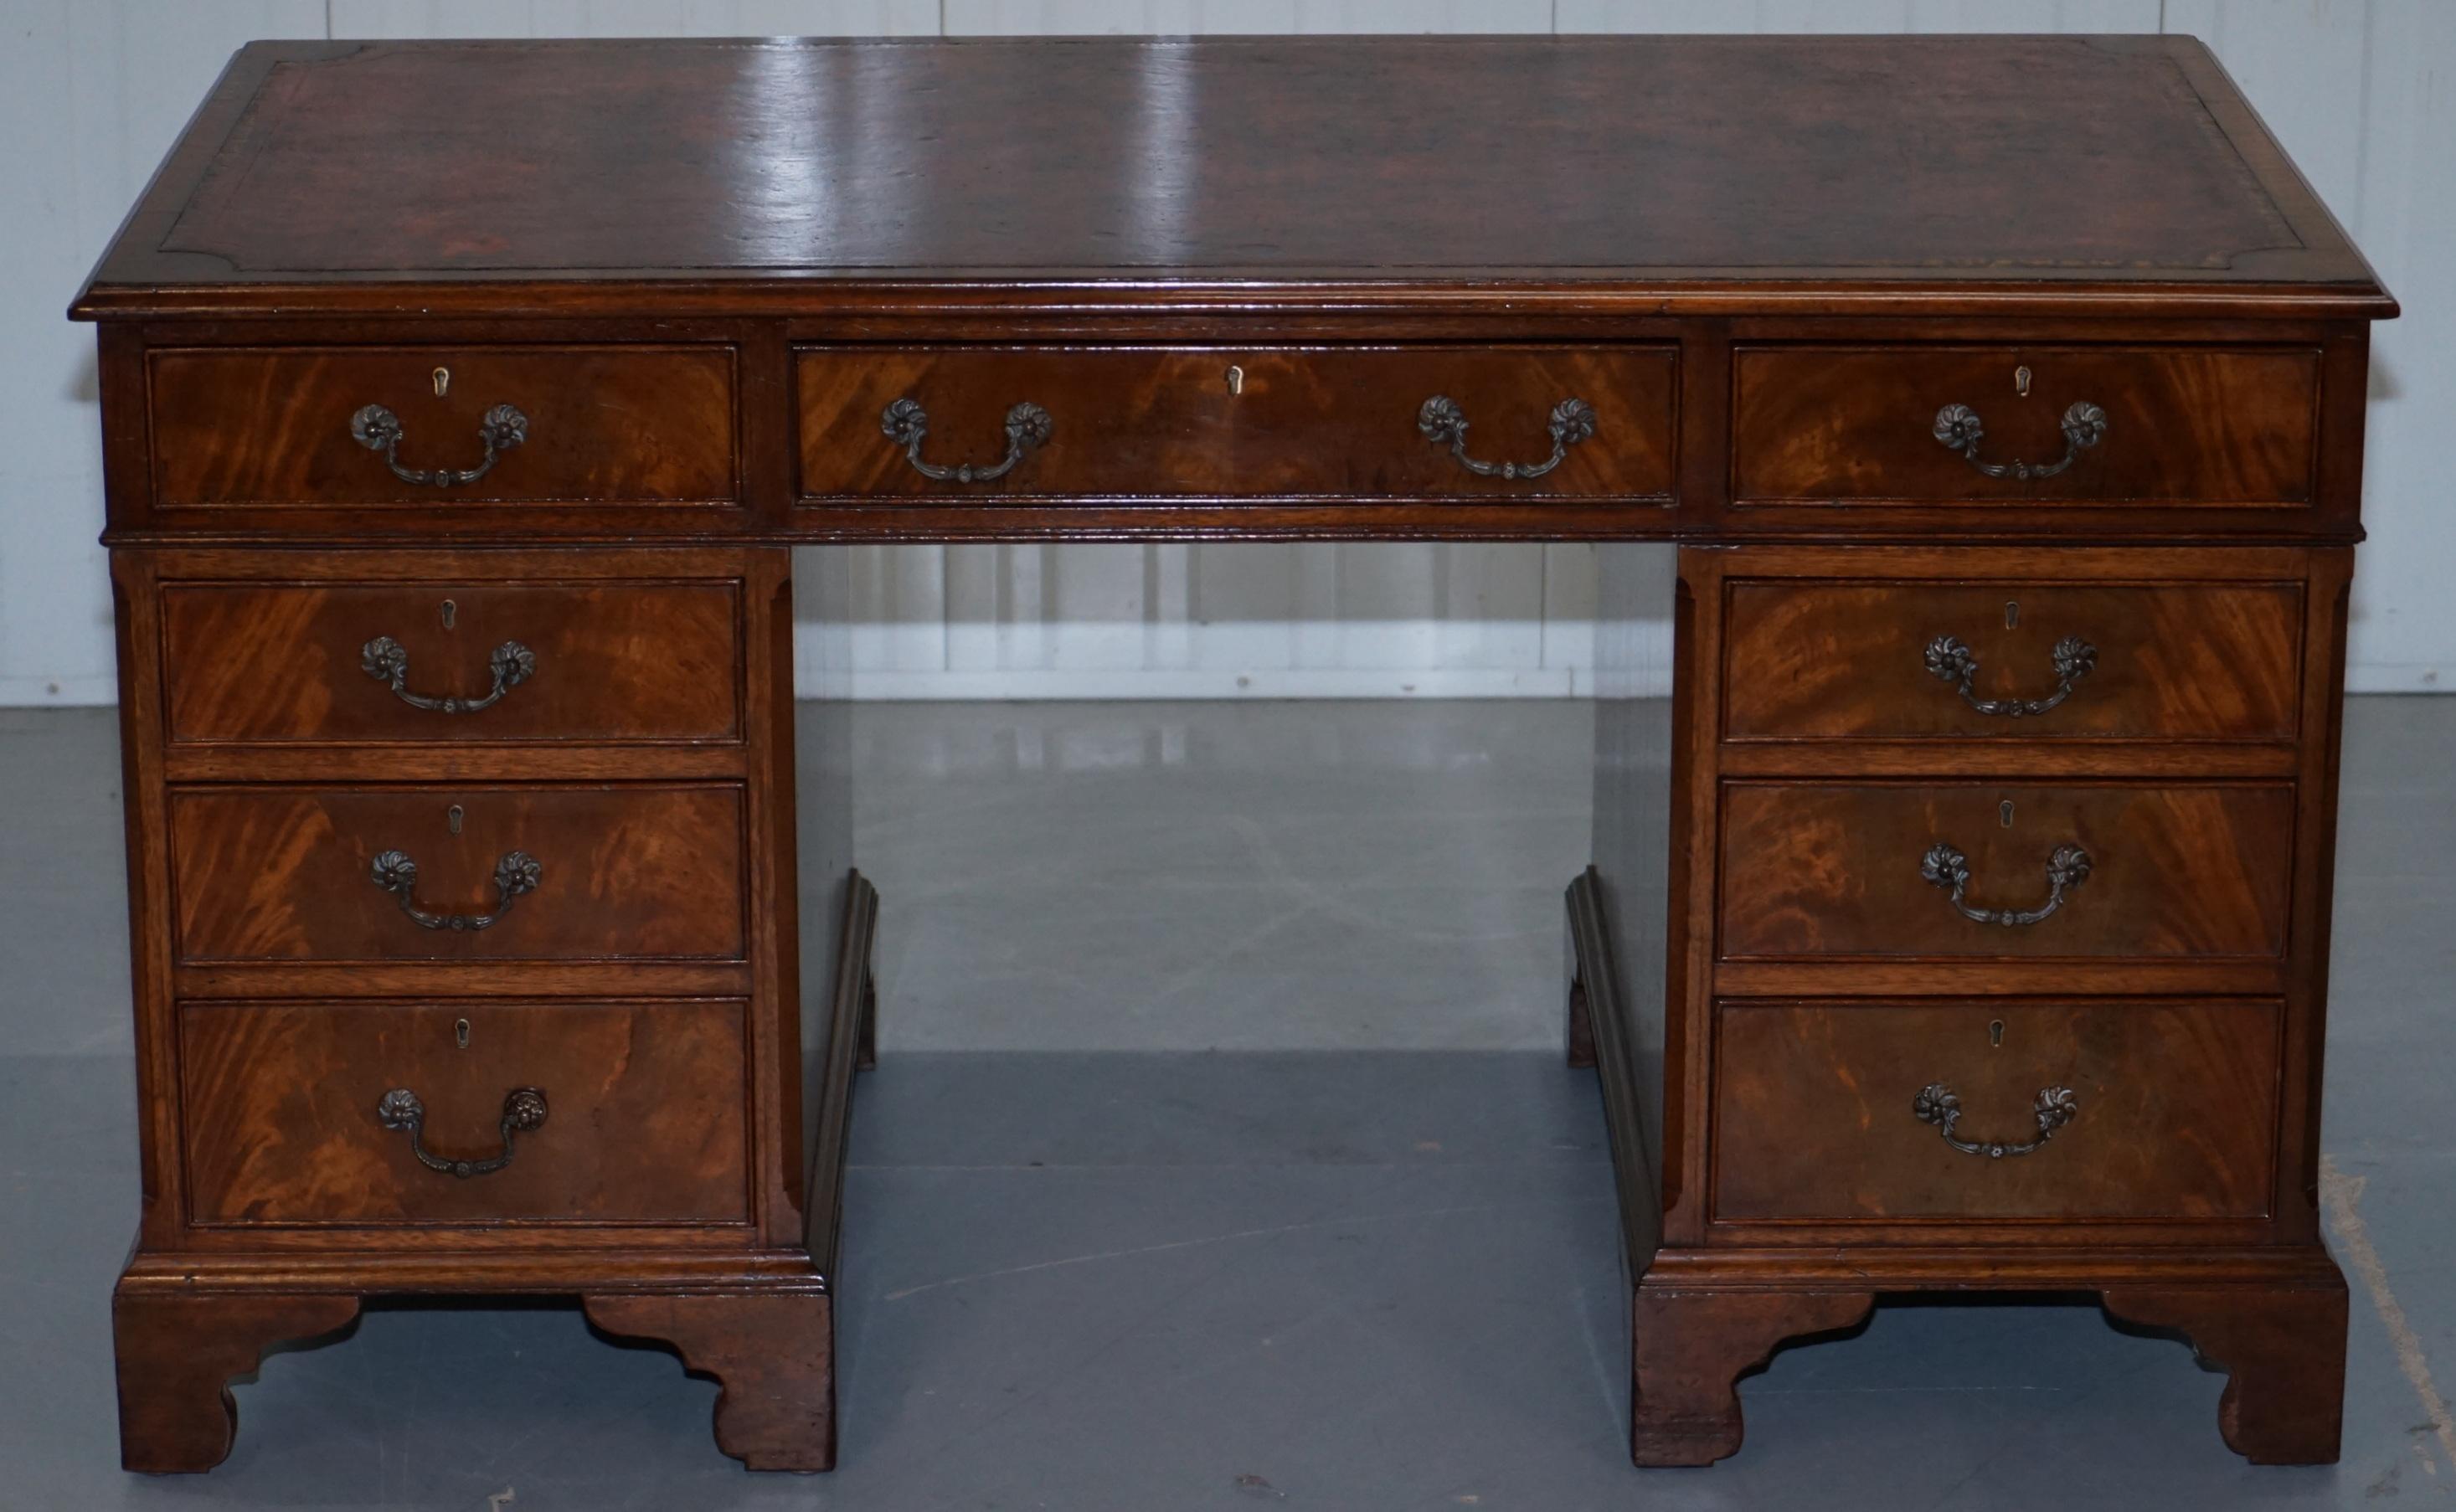 We are delighted to offer for sale this lovely original Luxury 19th-century Victorian solid mahogany twin pedestal partner desk with hand dyed brown leather top

A very good looking and well made period desk, it is rare to find an original, there